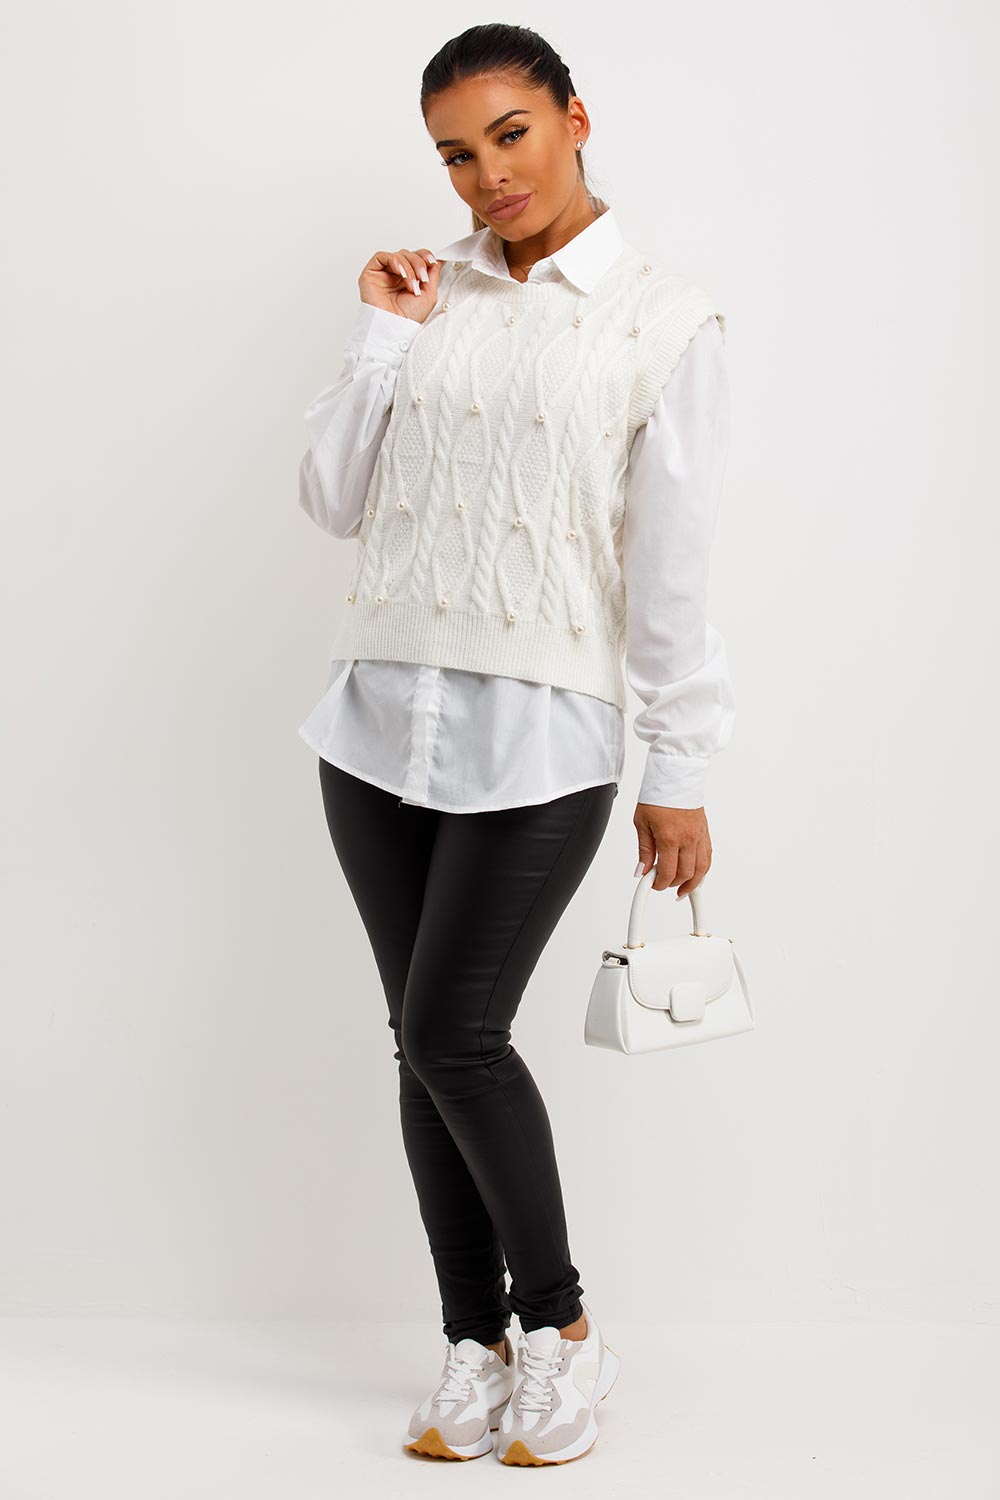 womens jumper shirt with pearl detail